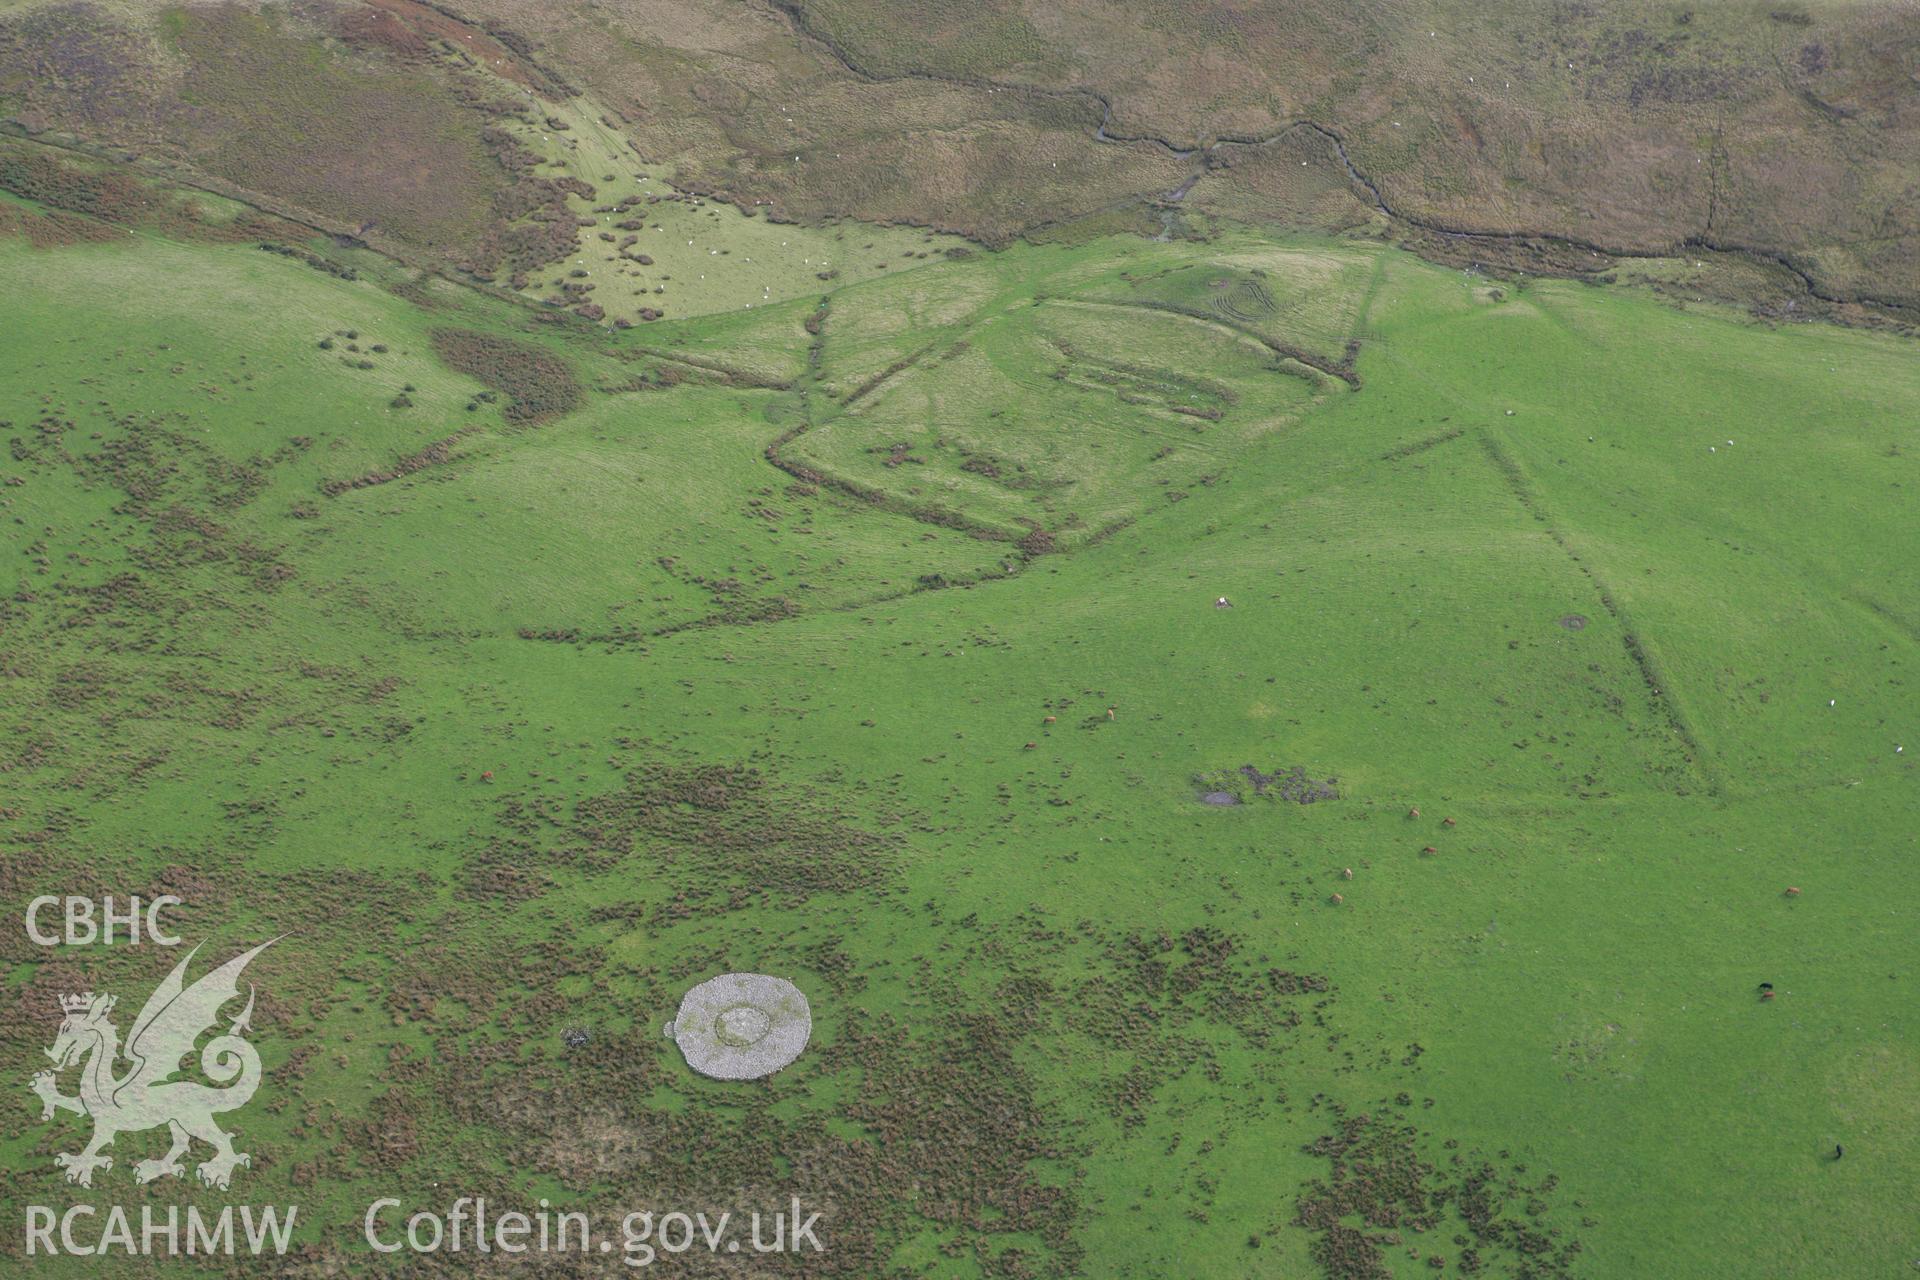 RCAHMW colour oblique aerial photograph of Hen Ddinbych and cairn Taken on 13 October 2009 by Toby Driver